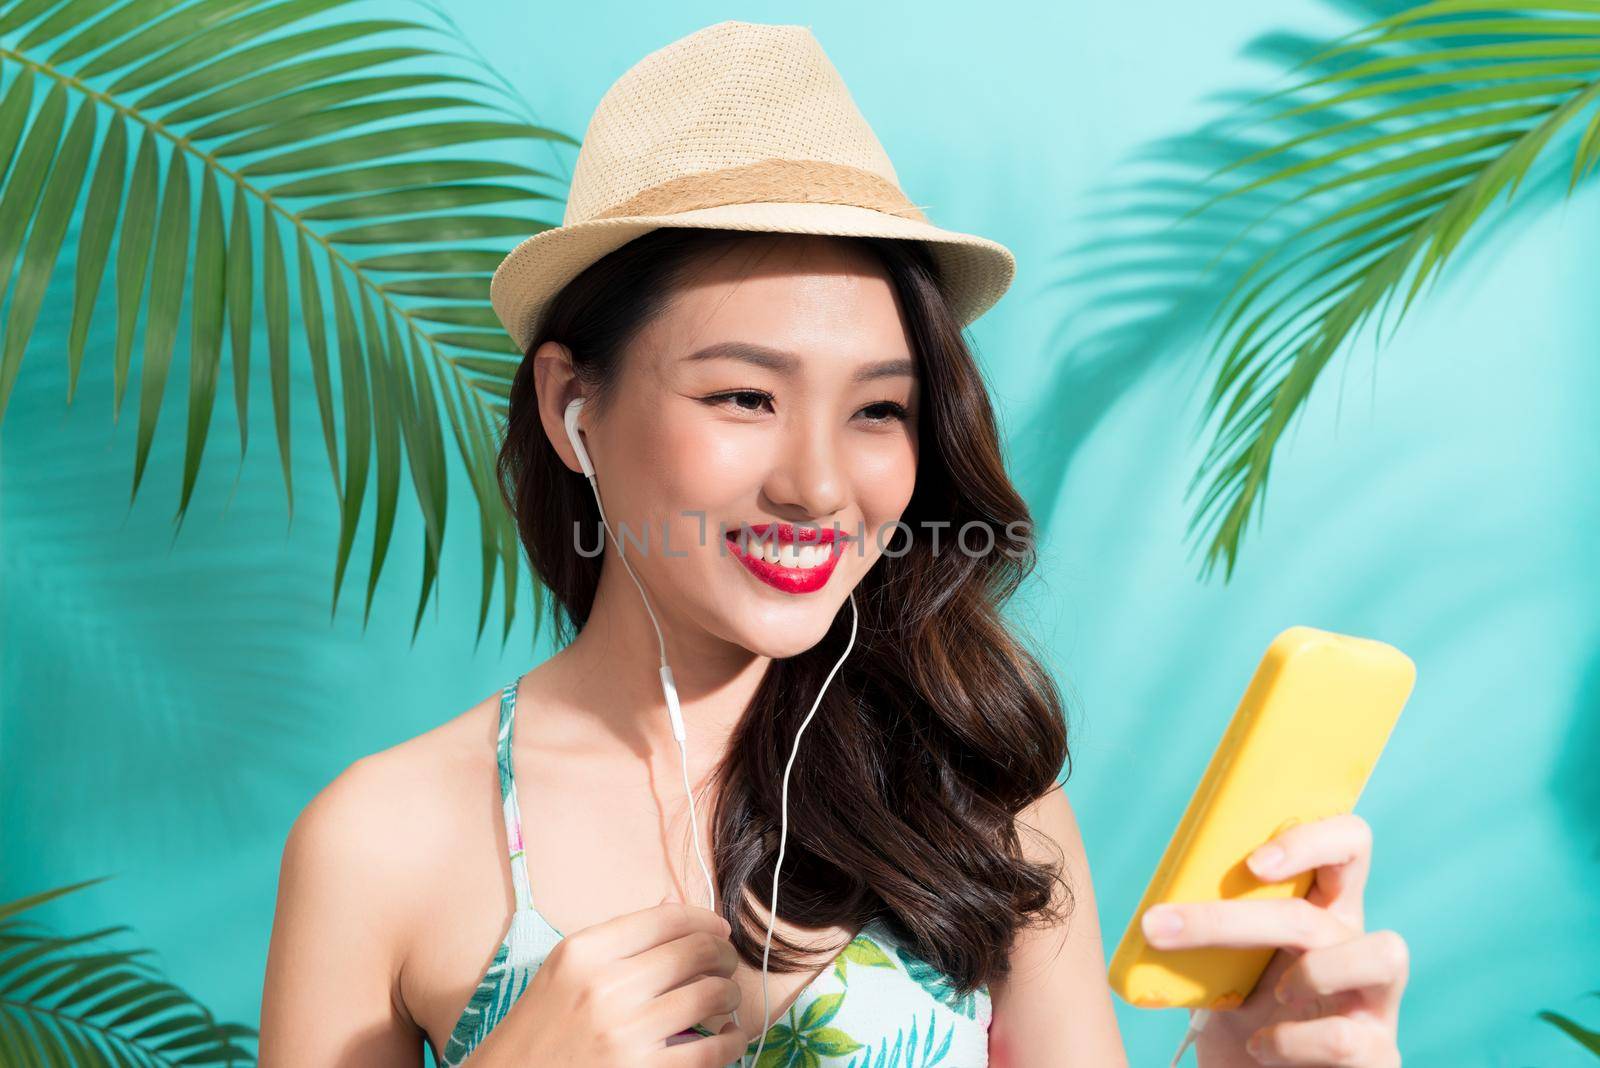 Summer fashion girl standing and smiling over vibrant blue background